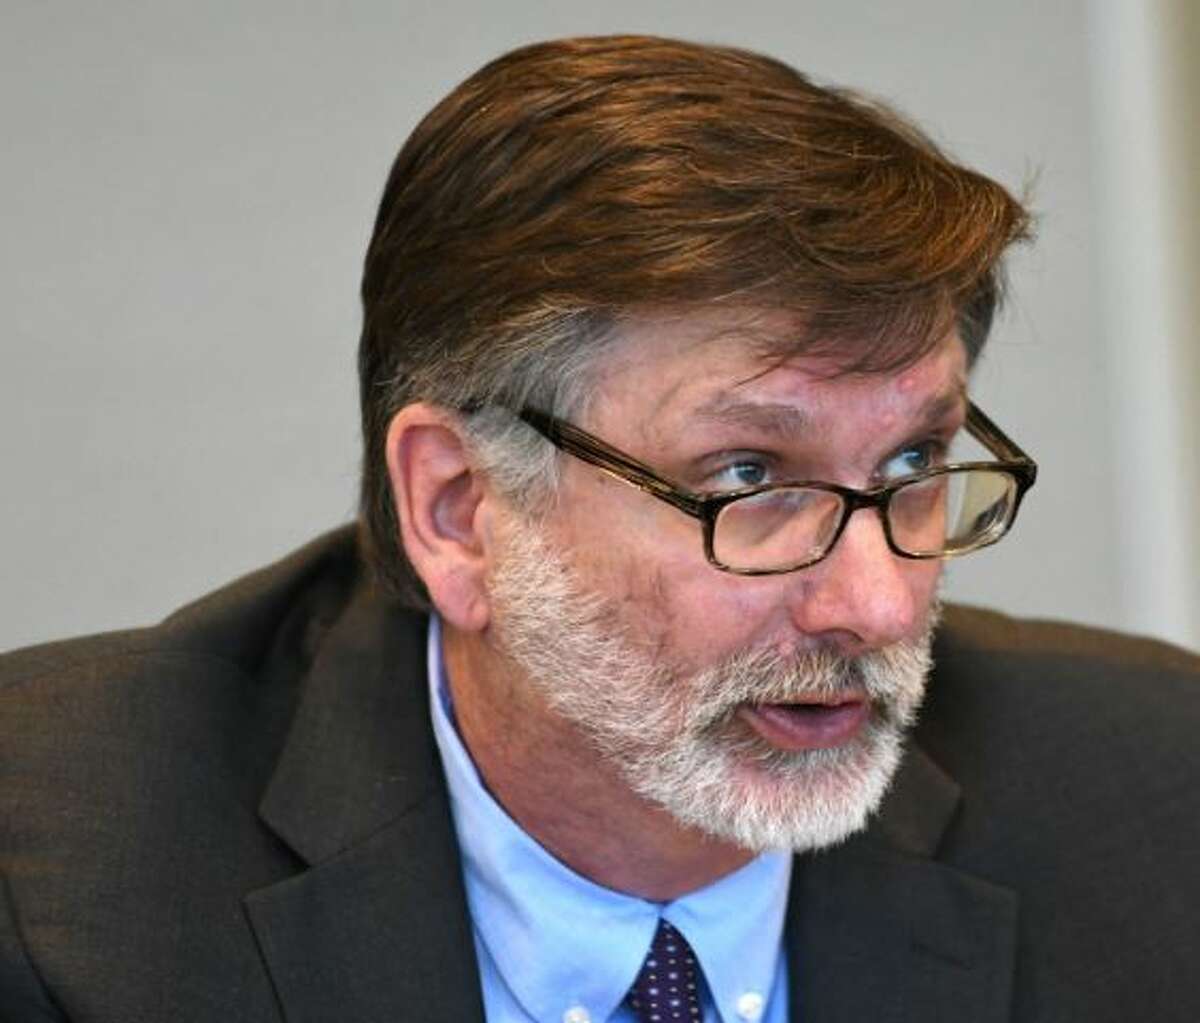 Former state Budget Director Robert Megna could be considered a fix-it man for ailing government agencies. His new roll at the State University of New York is to help assist the troubled SUNY Polytechnic wing after a series of corruption charges have been leveled against its former leader and affiliated developers.